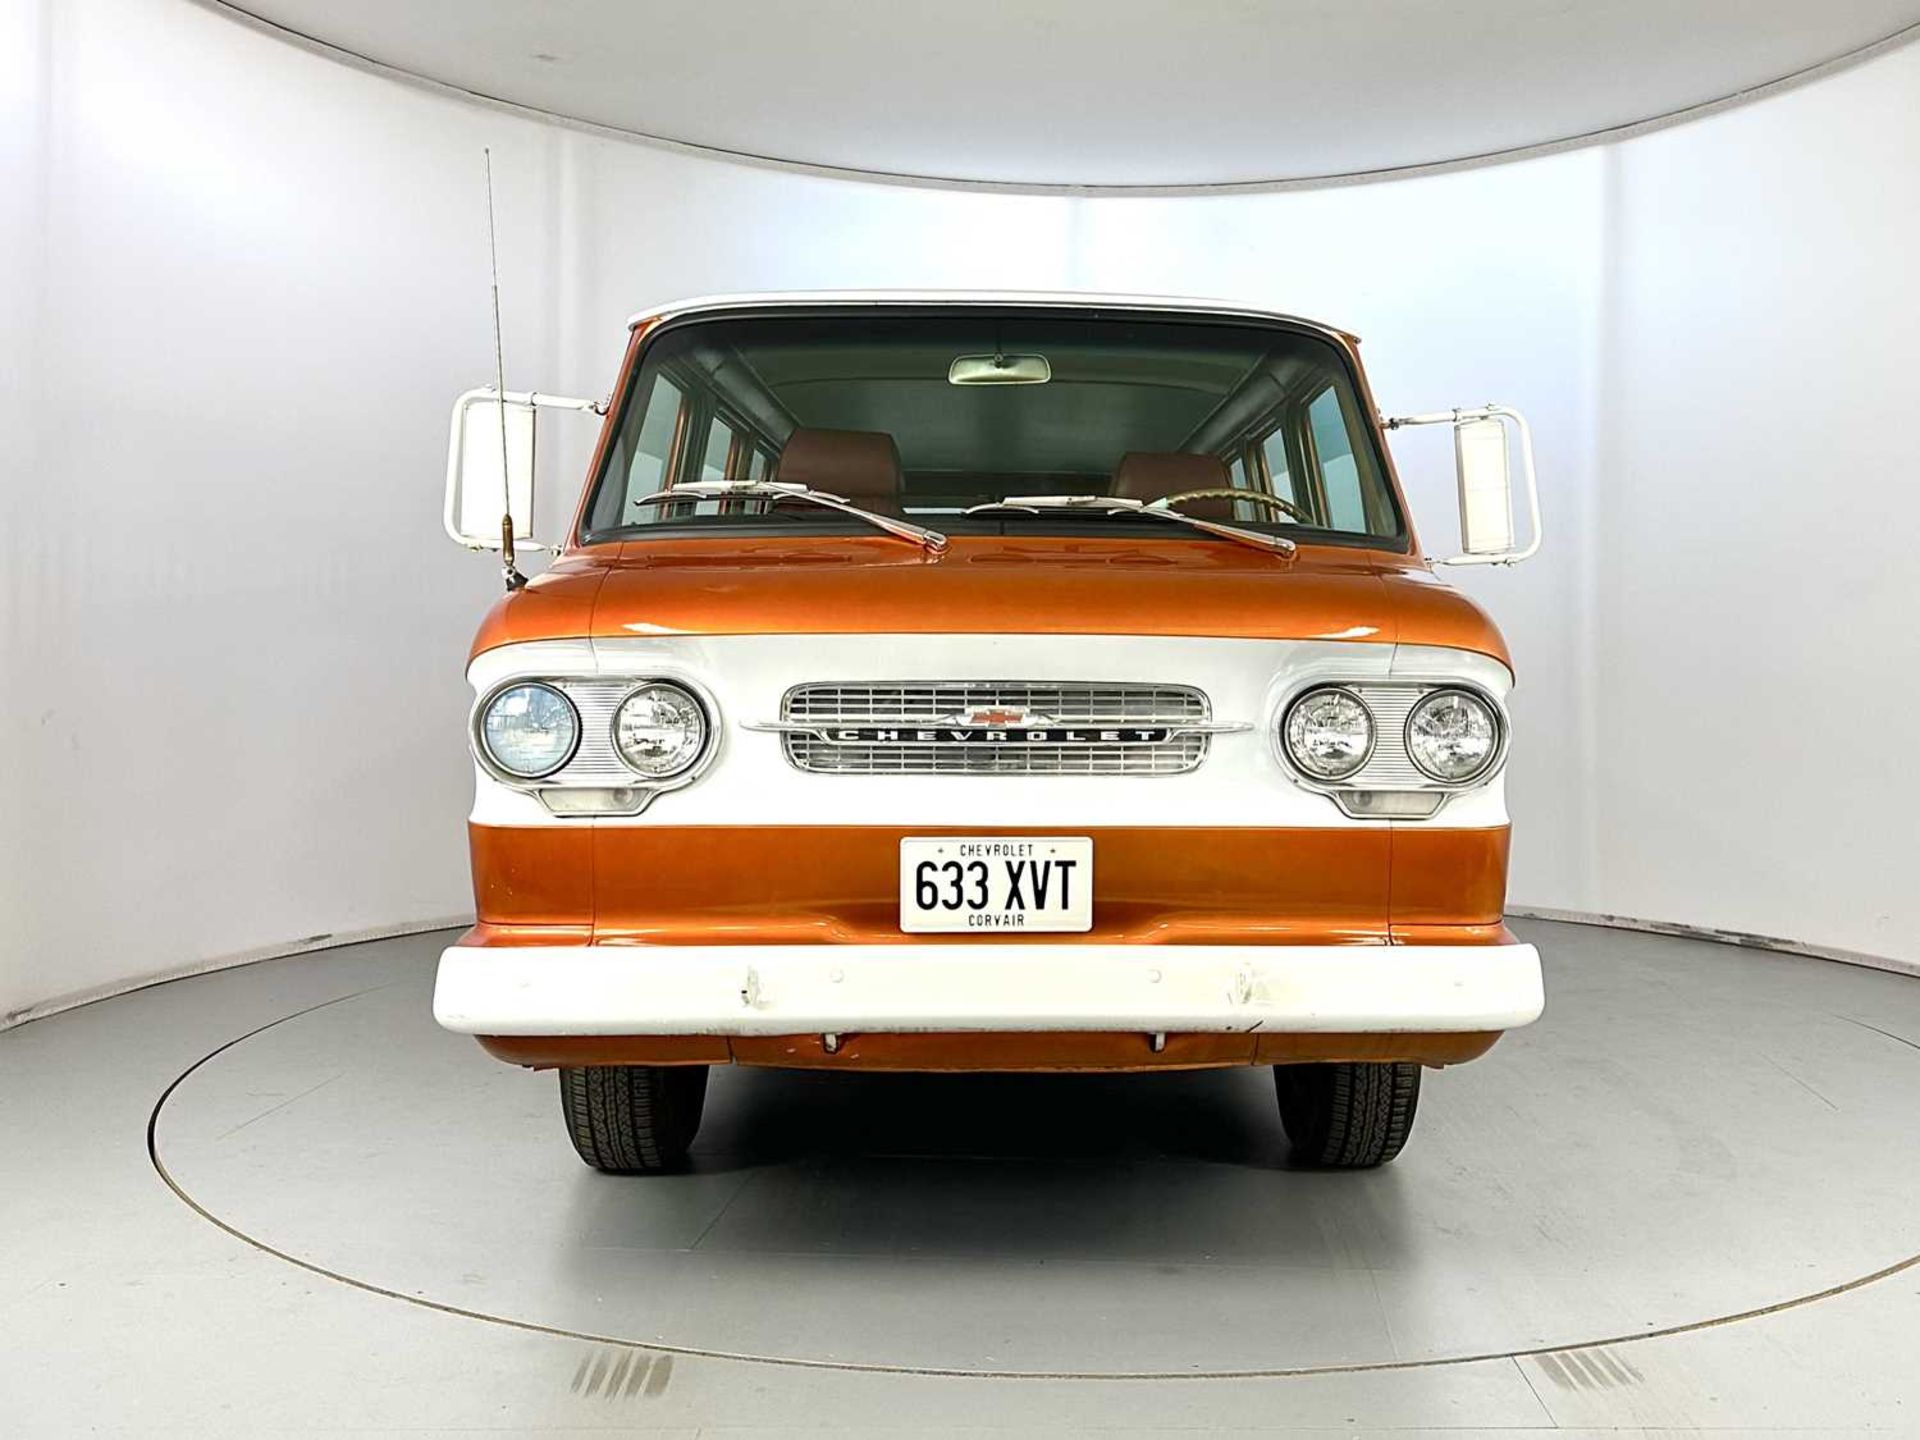 1961 Chevrolet Corvair Greenbrier - Image 2 of 38